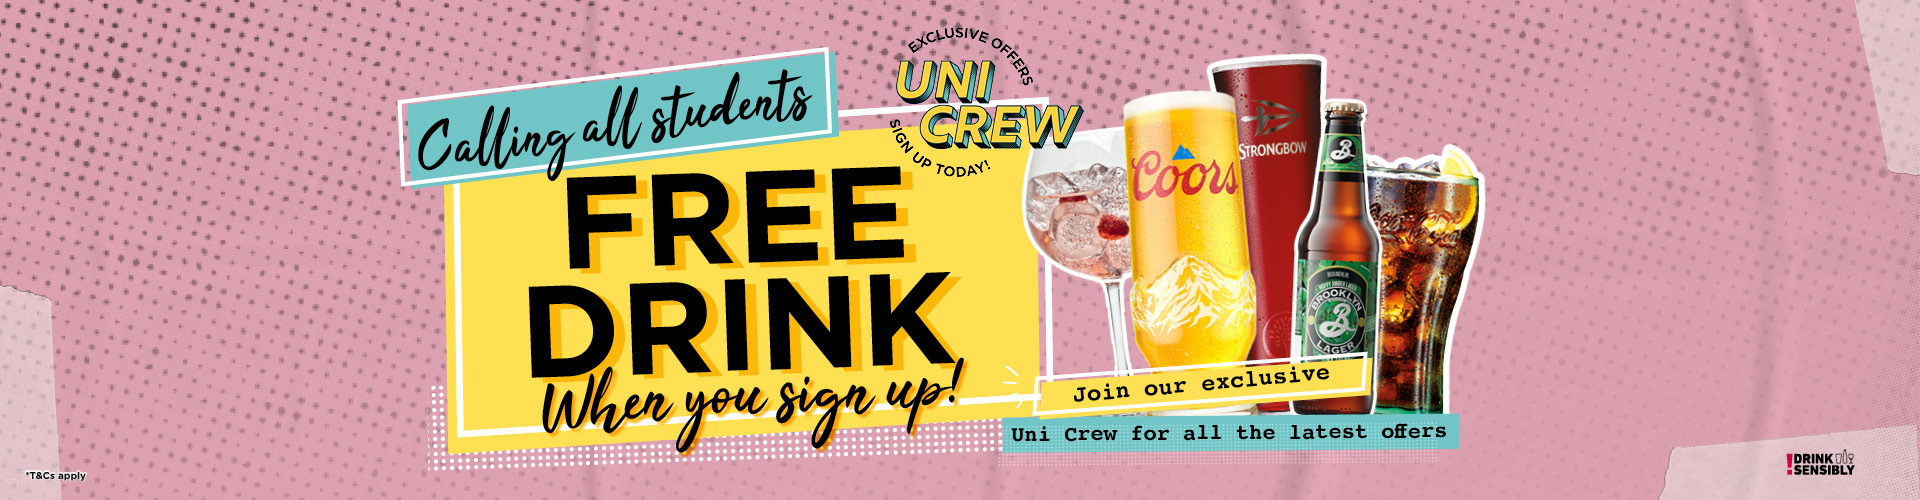 Calling all students - free drink when you sign up!